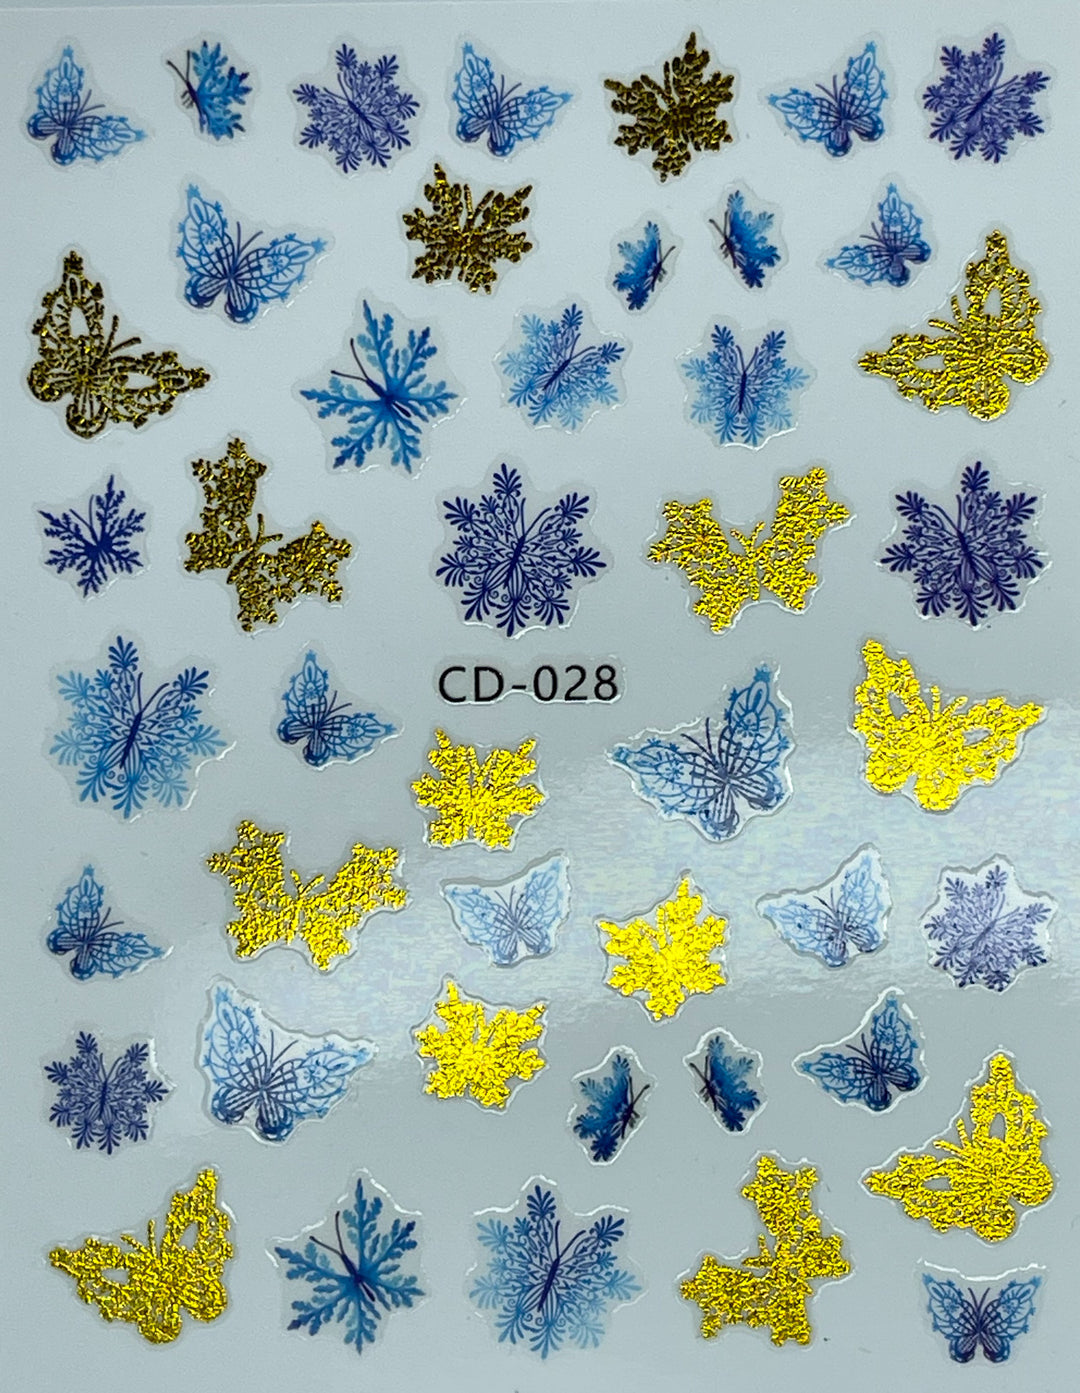 MM - "CD-028 Fluttering Flakes" Decals